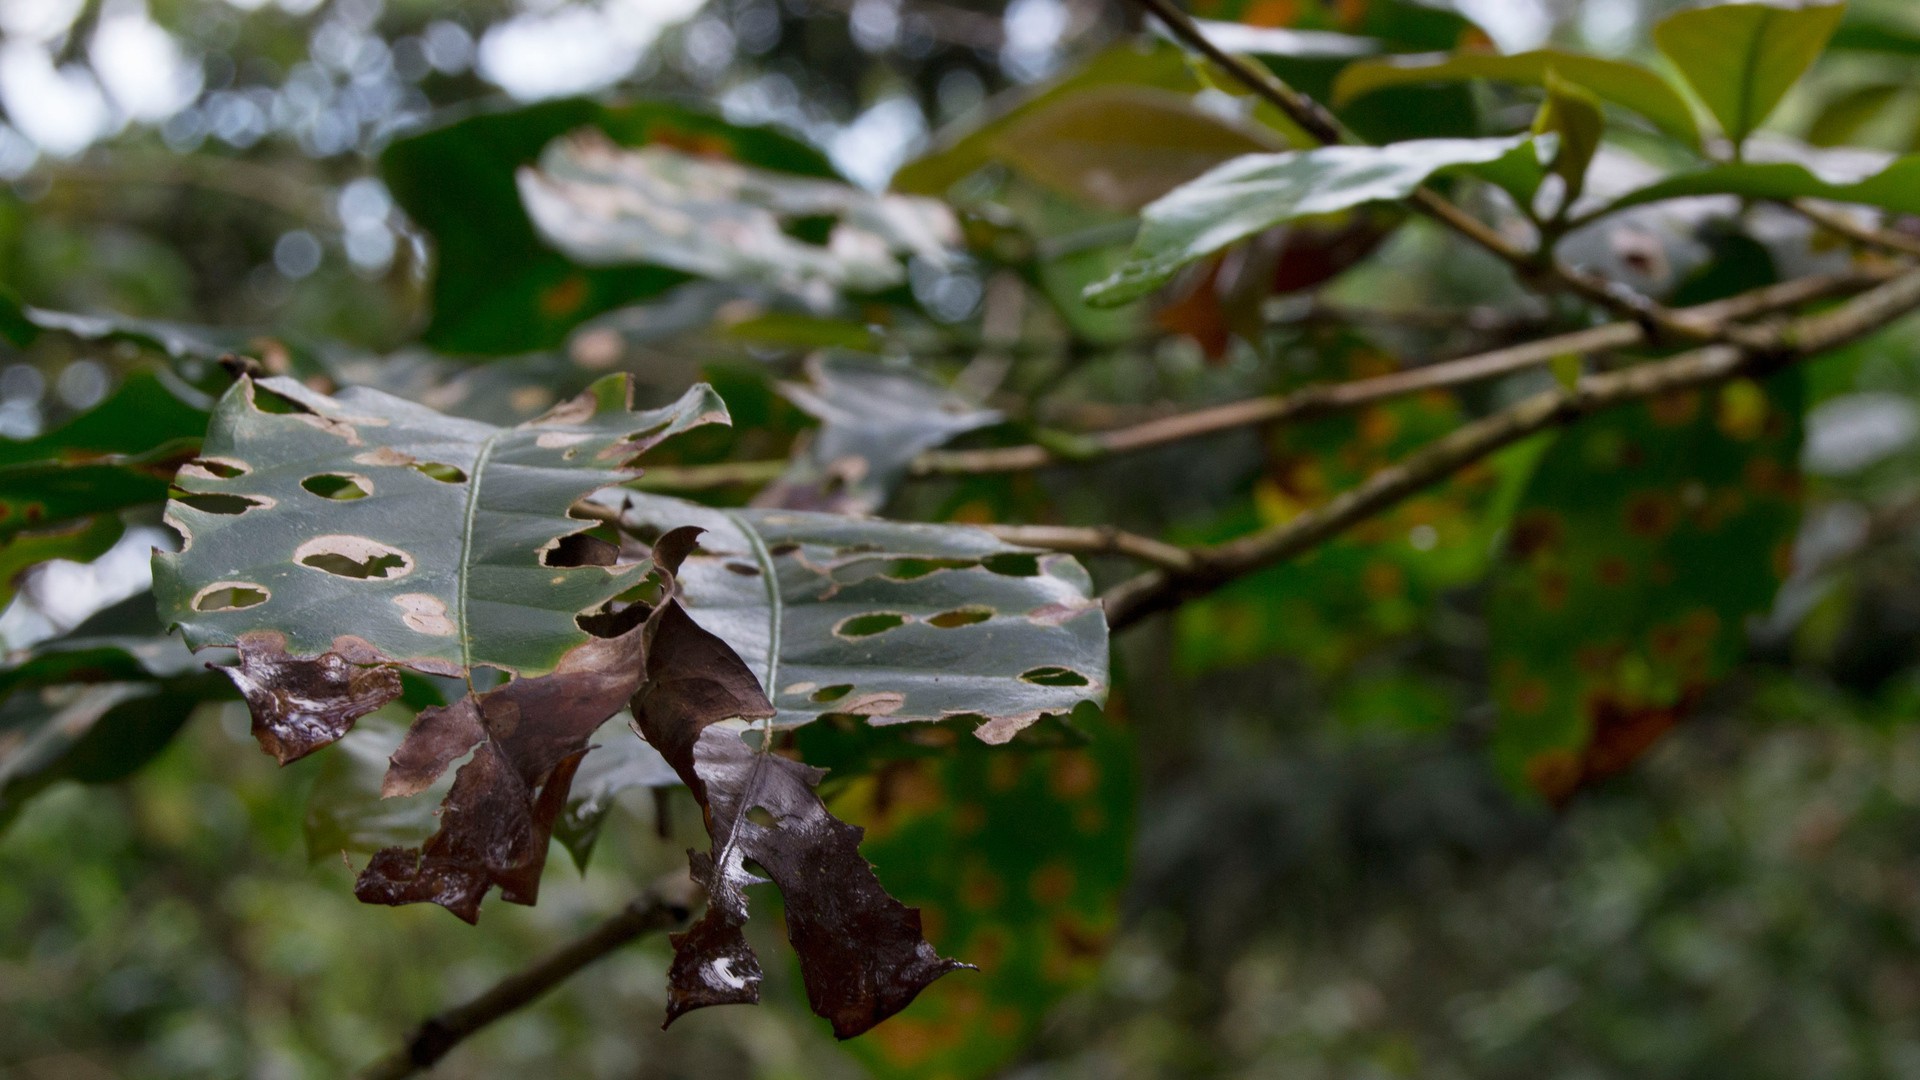 The rust fungus invades the leaves of a coffee plant until they fall off of the plant reducing its ability to produce coffee cherries. (Photo by Marlena Sauceda.)